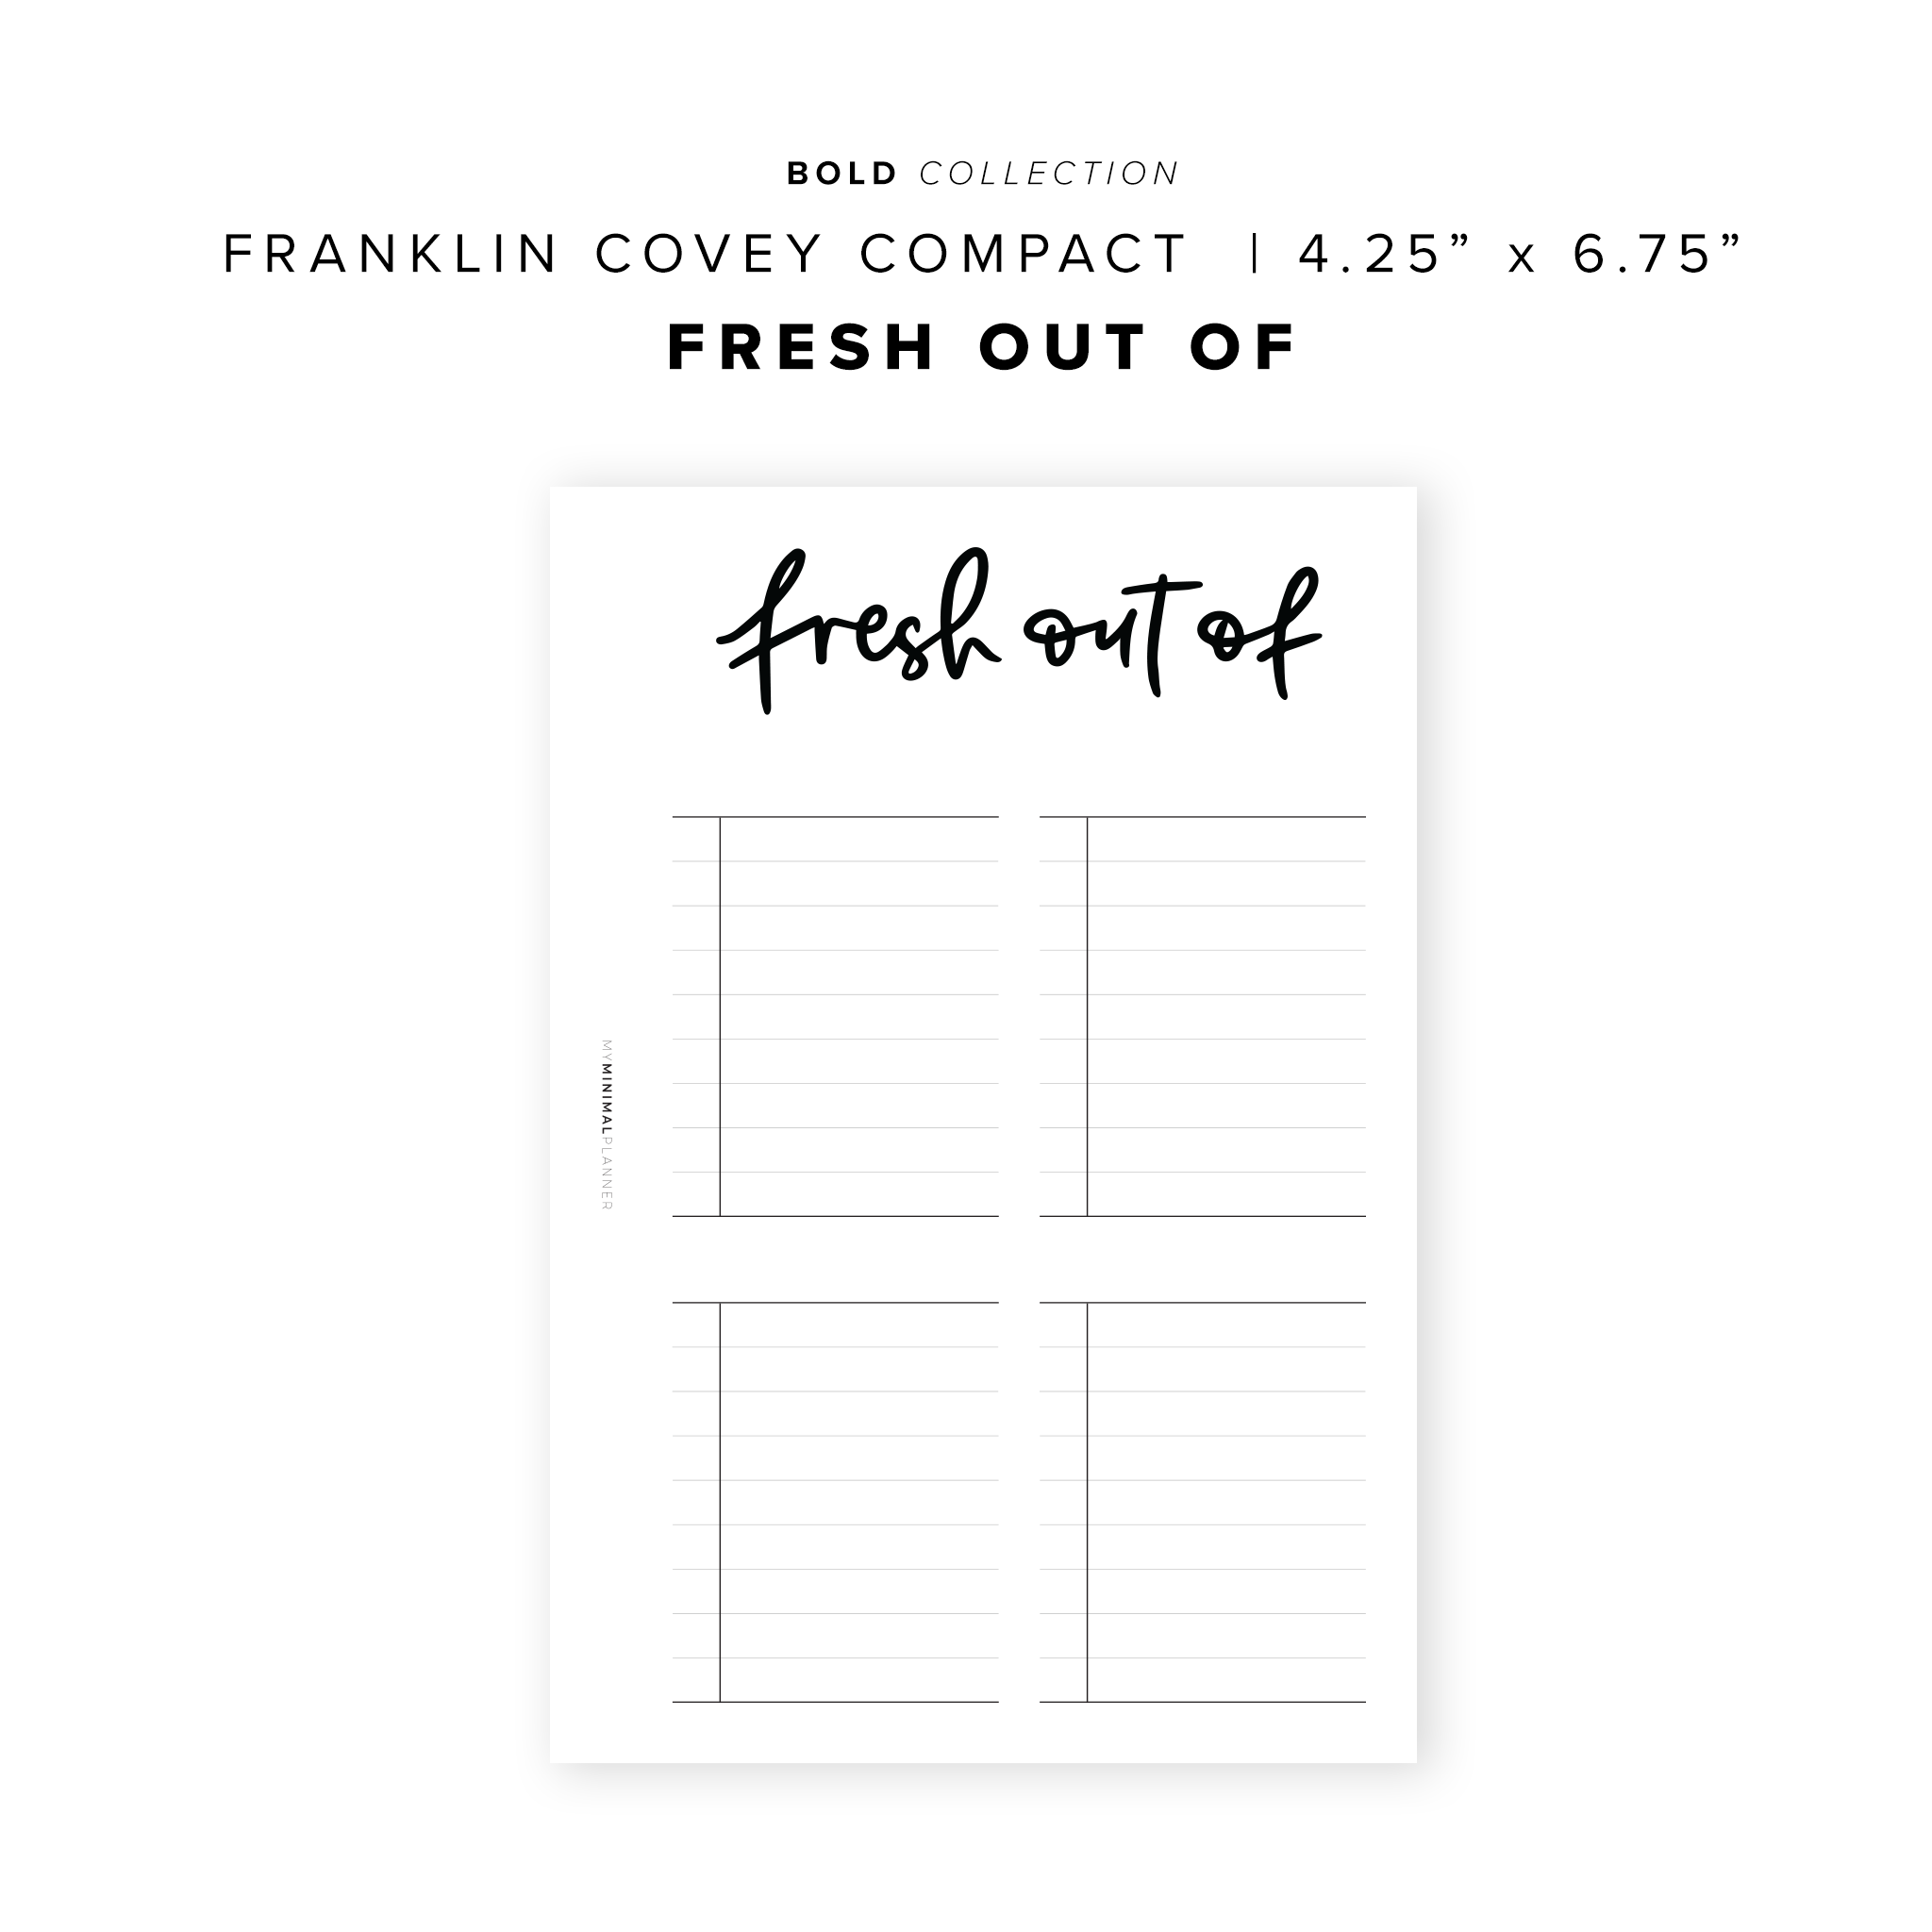 PR66 - Fresh Out Of - Printable Insert